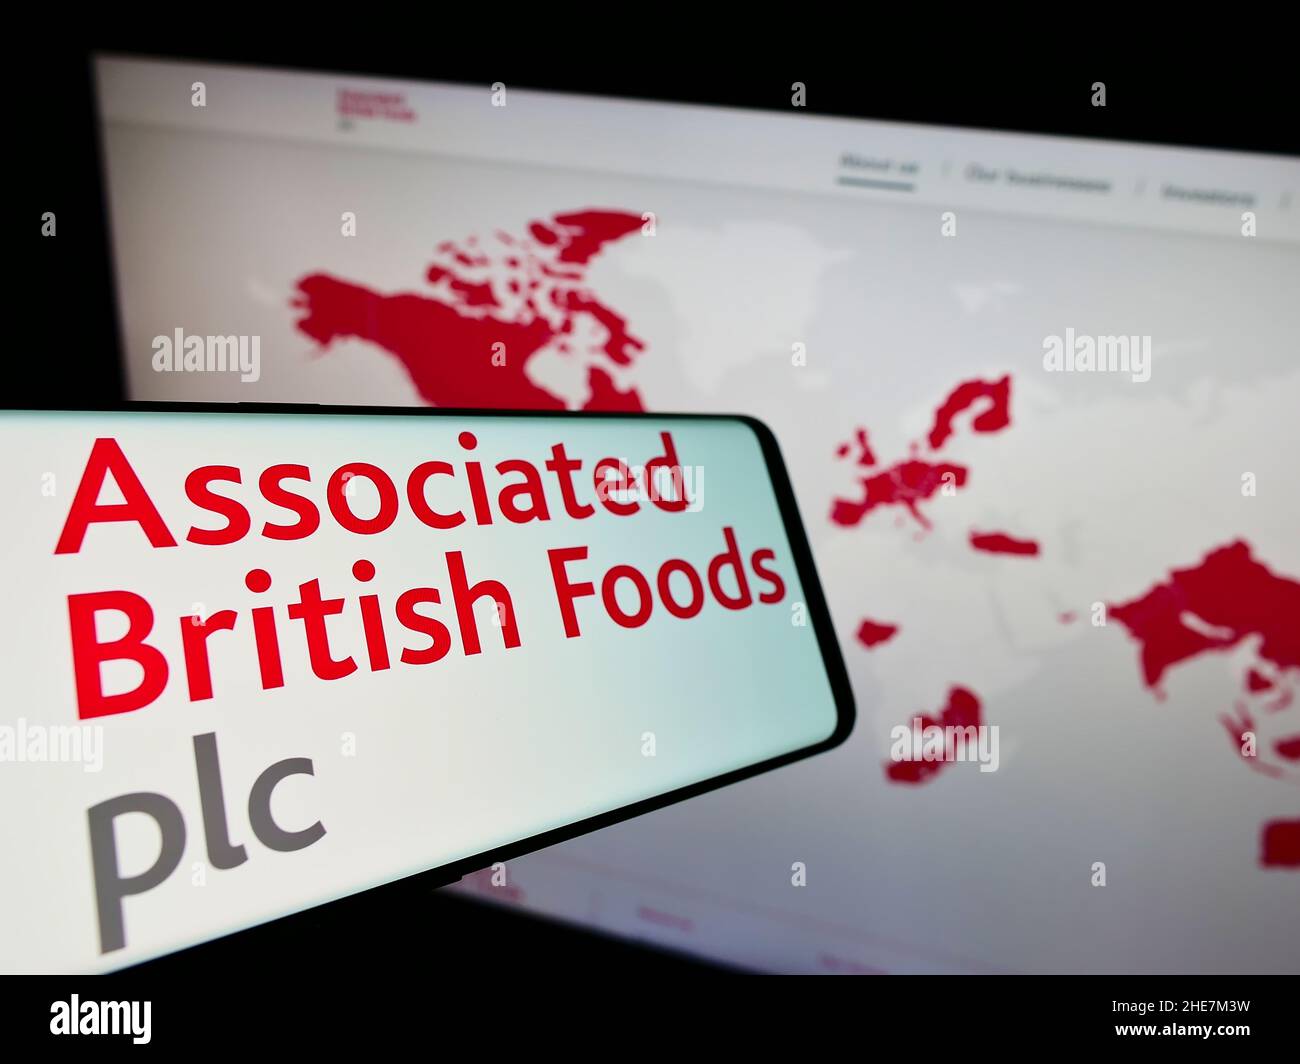 Cellphone with logo of company Associated British Foods plc (ABF) on screen in front of business website. Focus on center of phone display. Stock Photo